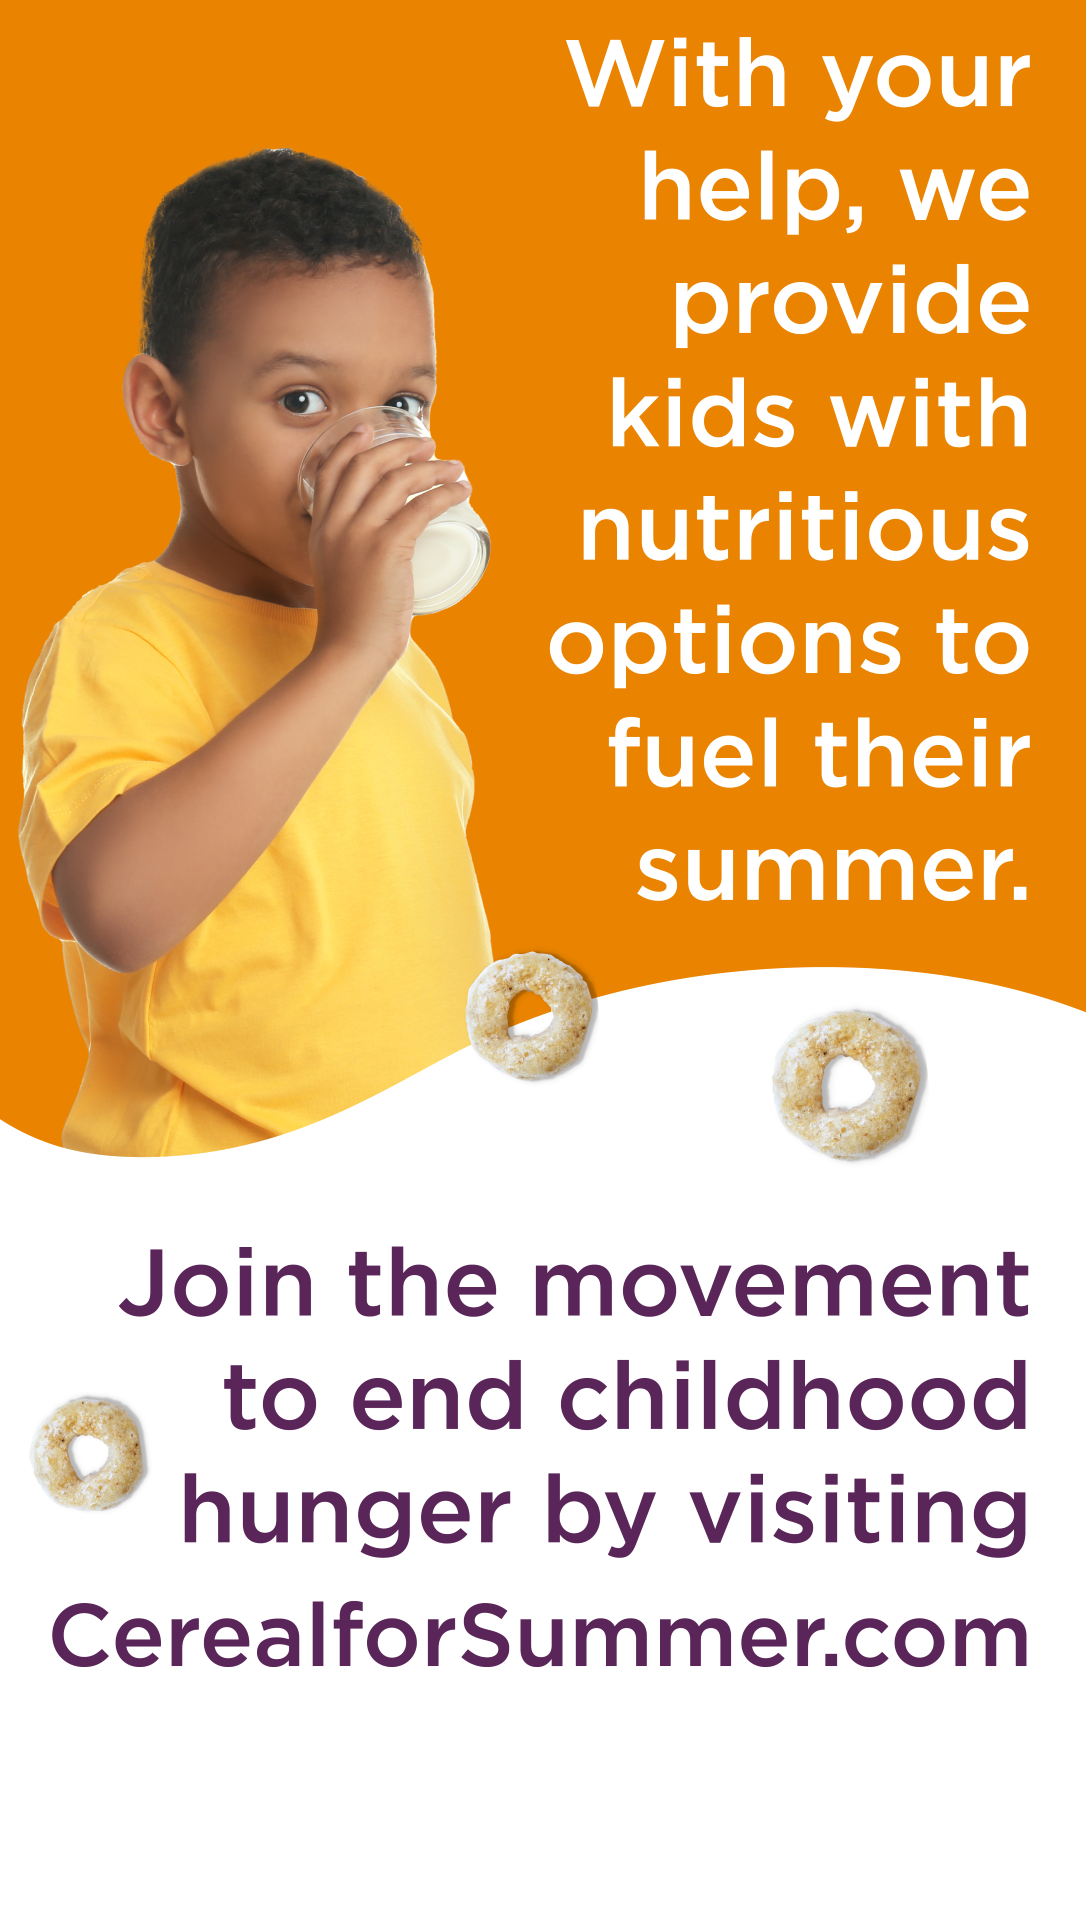 With your help, we provide kids with nutritious options to fuel their summer. Join the movement to end child hunger by visiting CerealforSummer.org